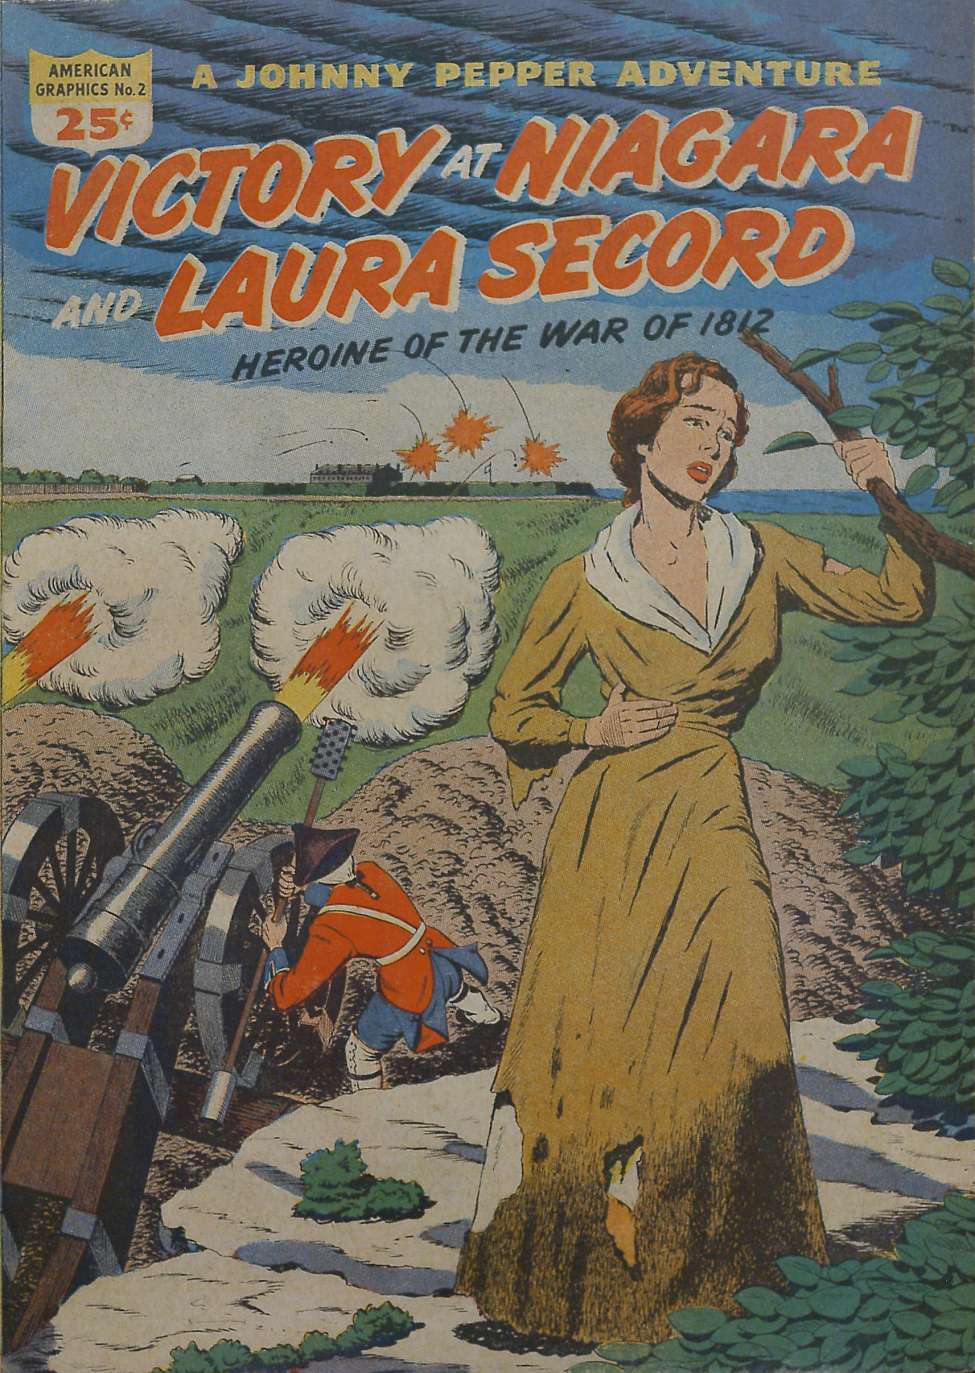 Book Cover For Victory at Niagara and Laura Secord